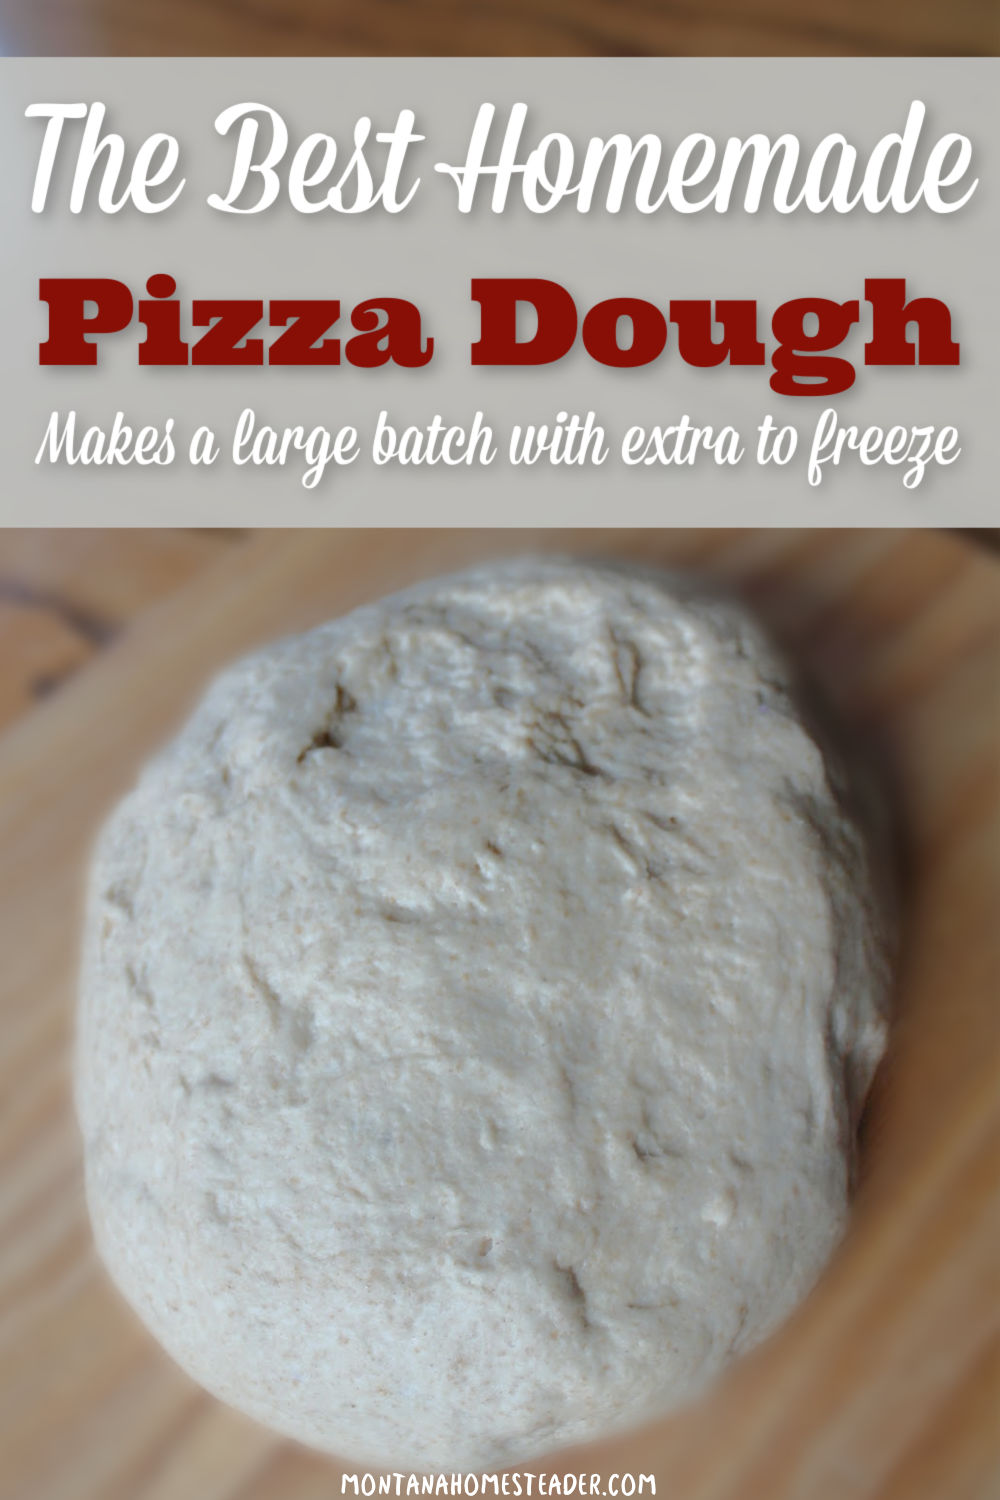 The best homemade pizza dough recipe easy to make simple ingredients makes large batch with extra to freeze large pizza dough ball on wood cutting board